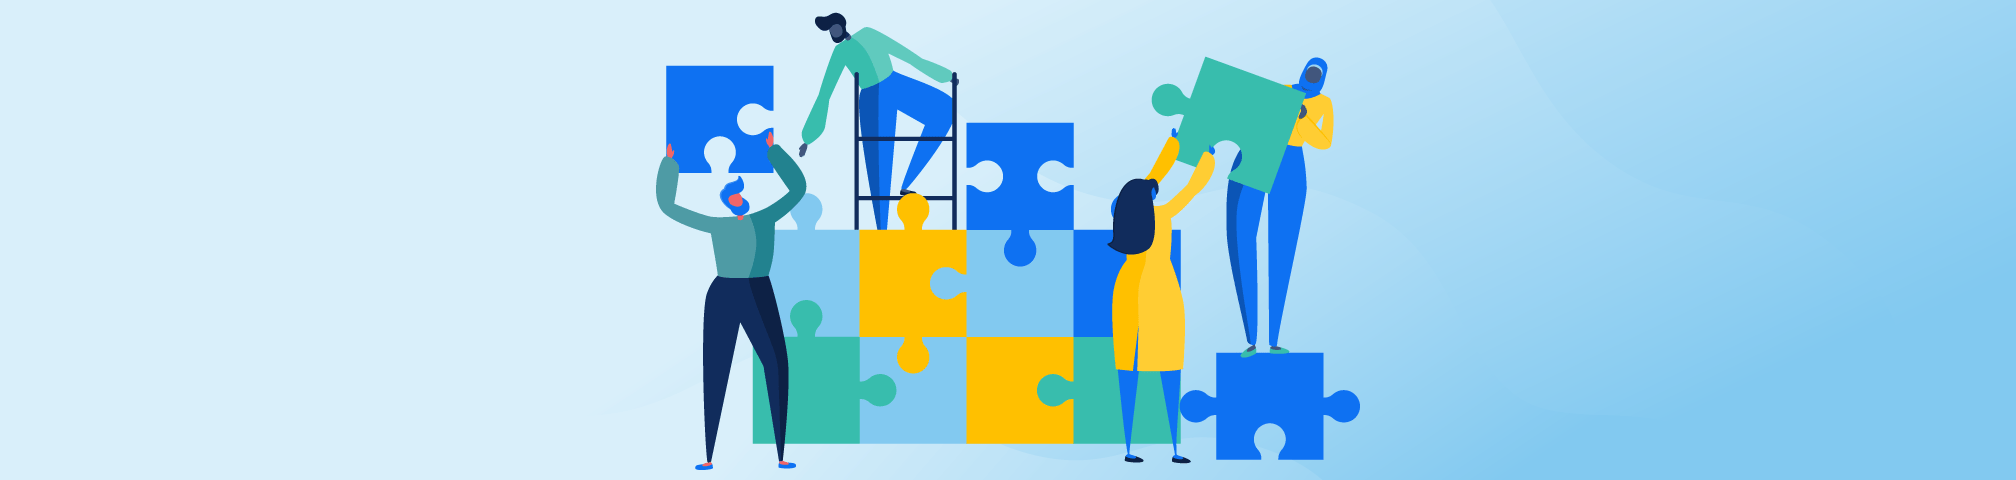 Illustration of people putting together a jigsaw